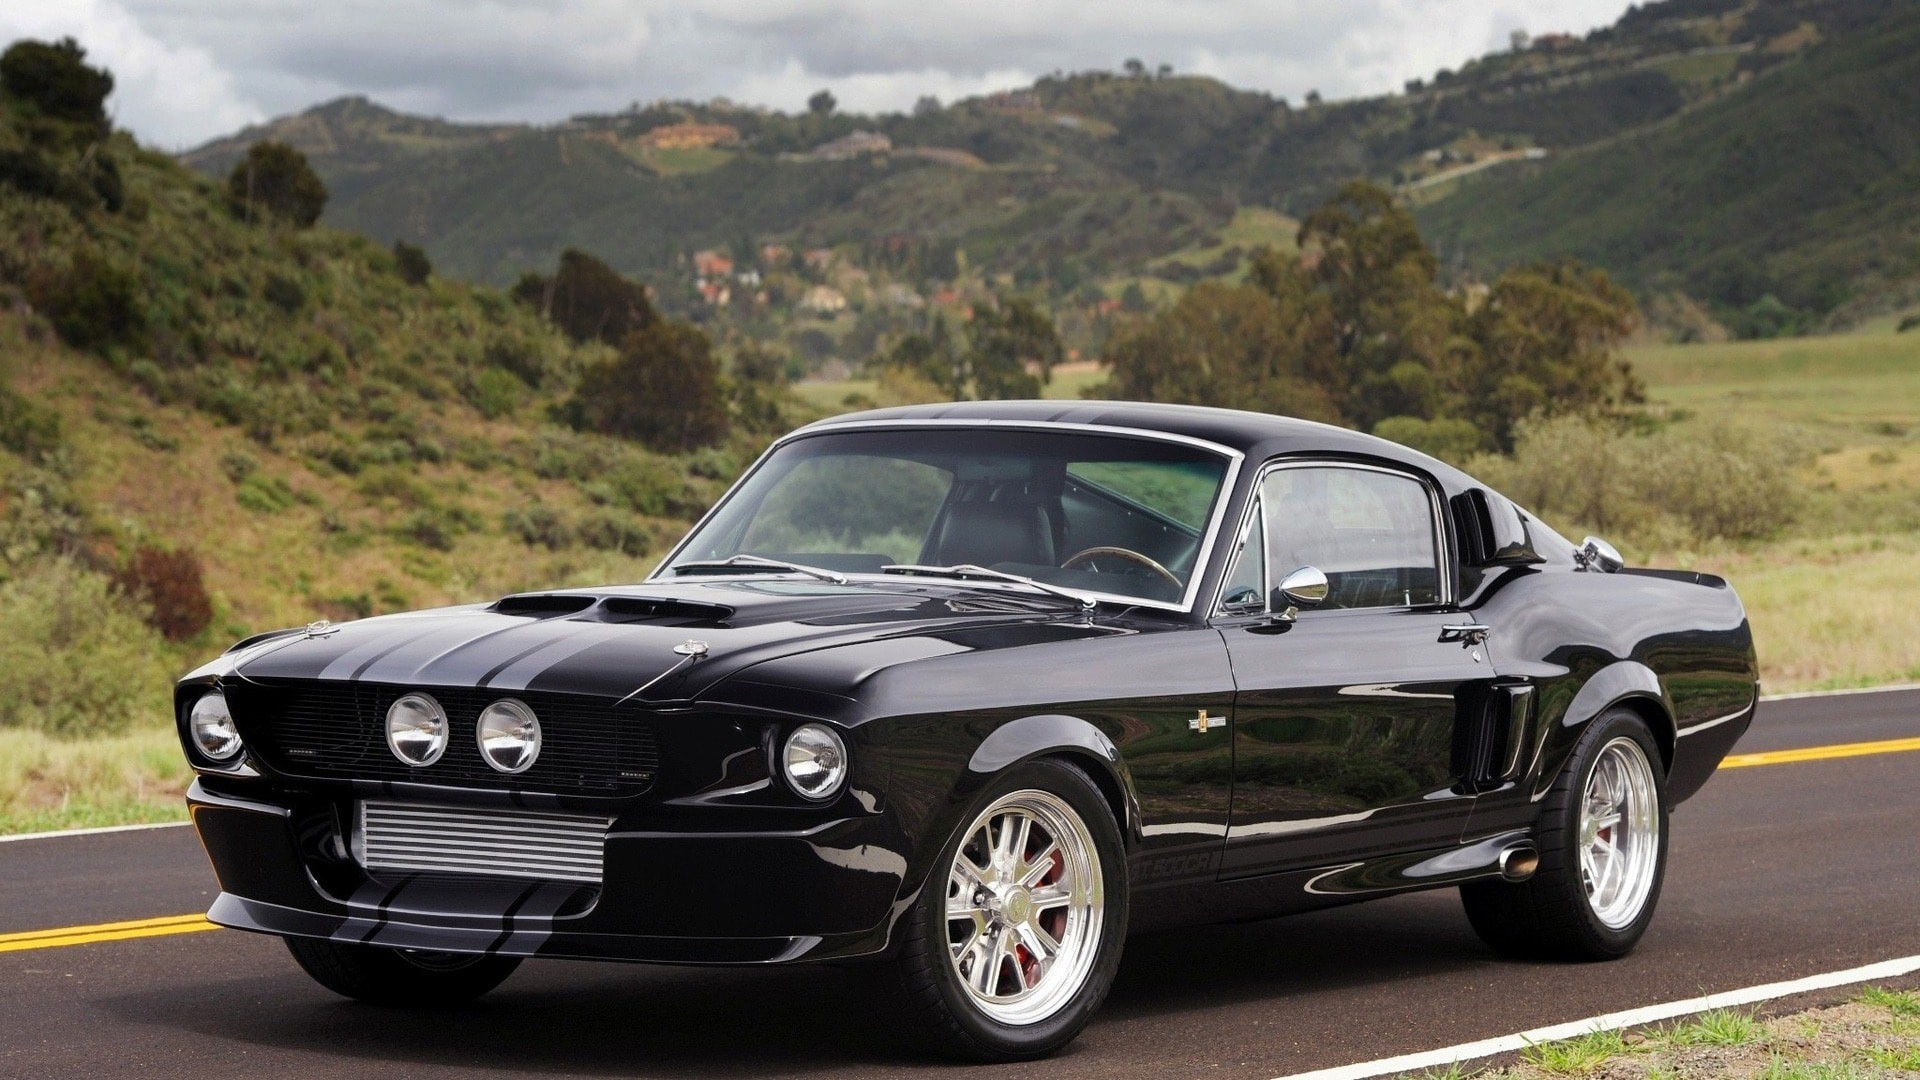 1920x1080 Top Large Luxury Ford Mustang Shelby Gt500 Eleanor 1967 Wallpaper Prices